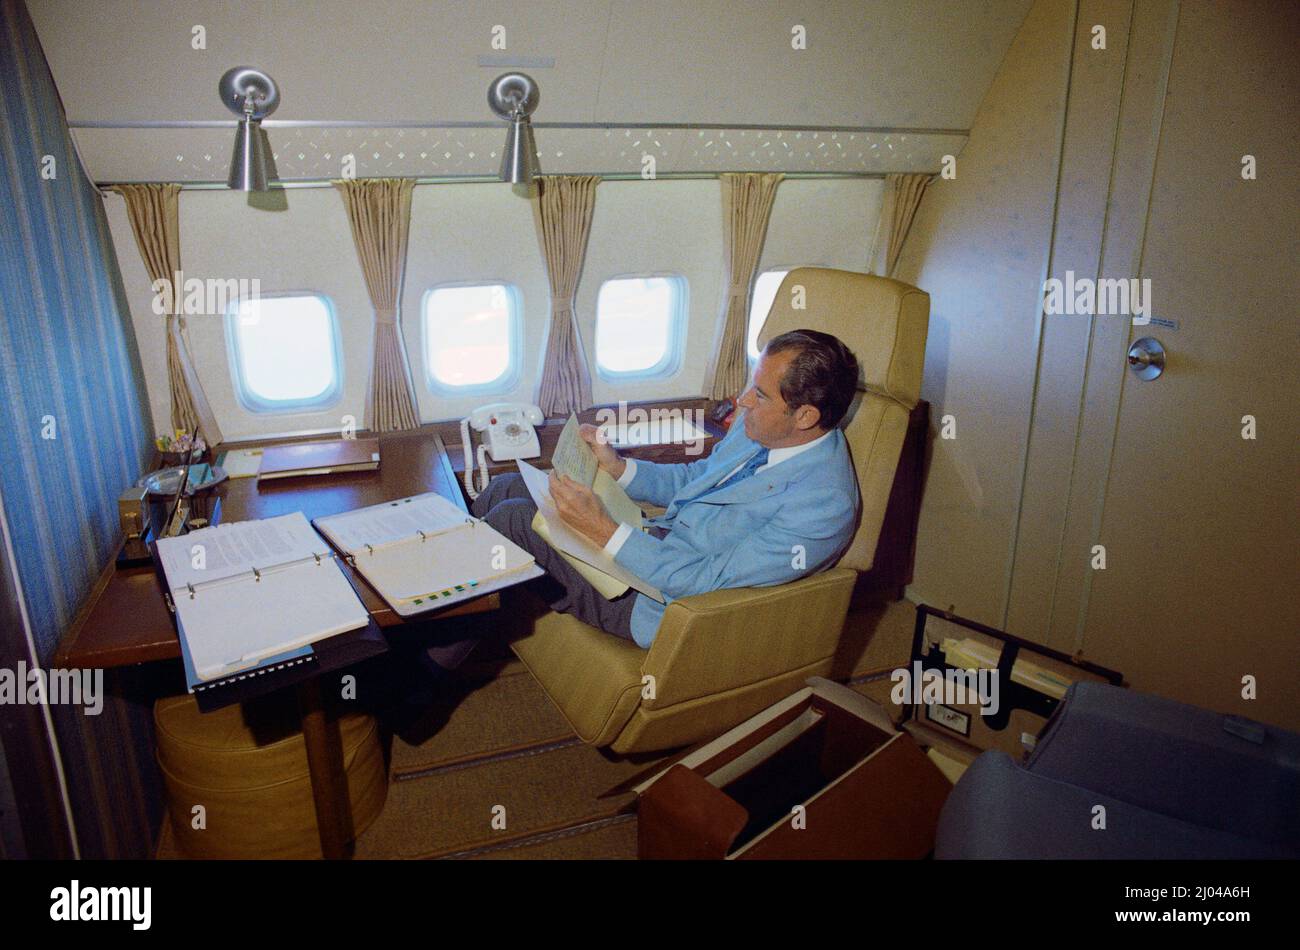 ONBOARD AIR FORCE ONE - 20 February 1972 - US President Richard Nixon reads briefing documents in his private office onboard Air Force One, enroute to Stock Photo